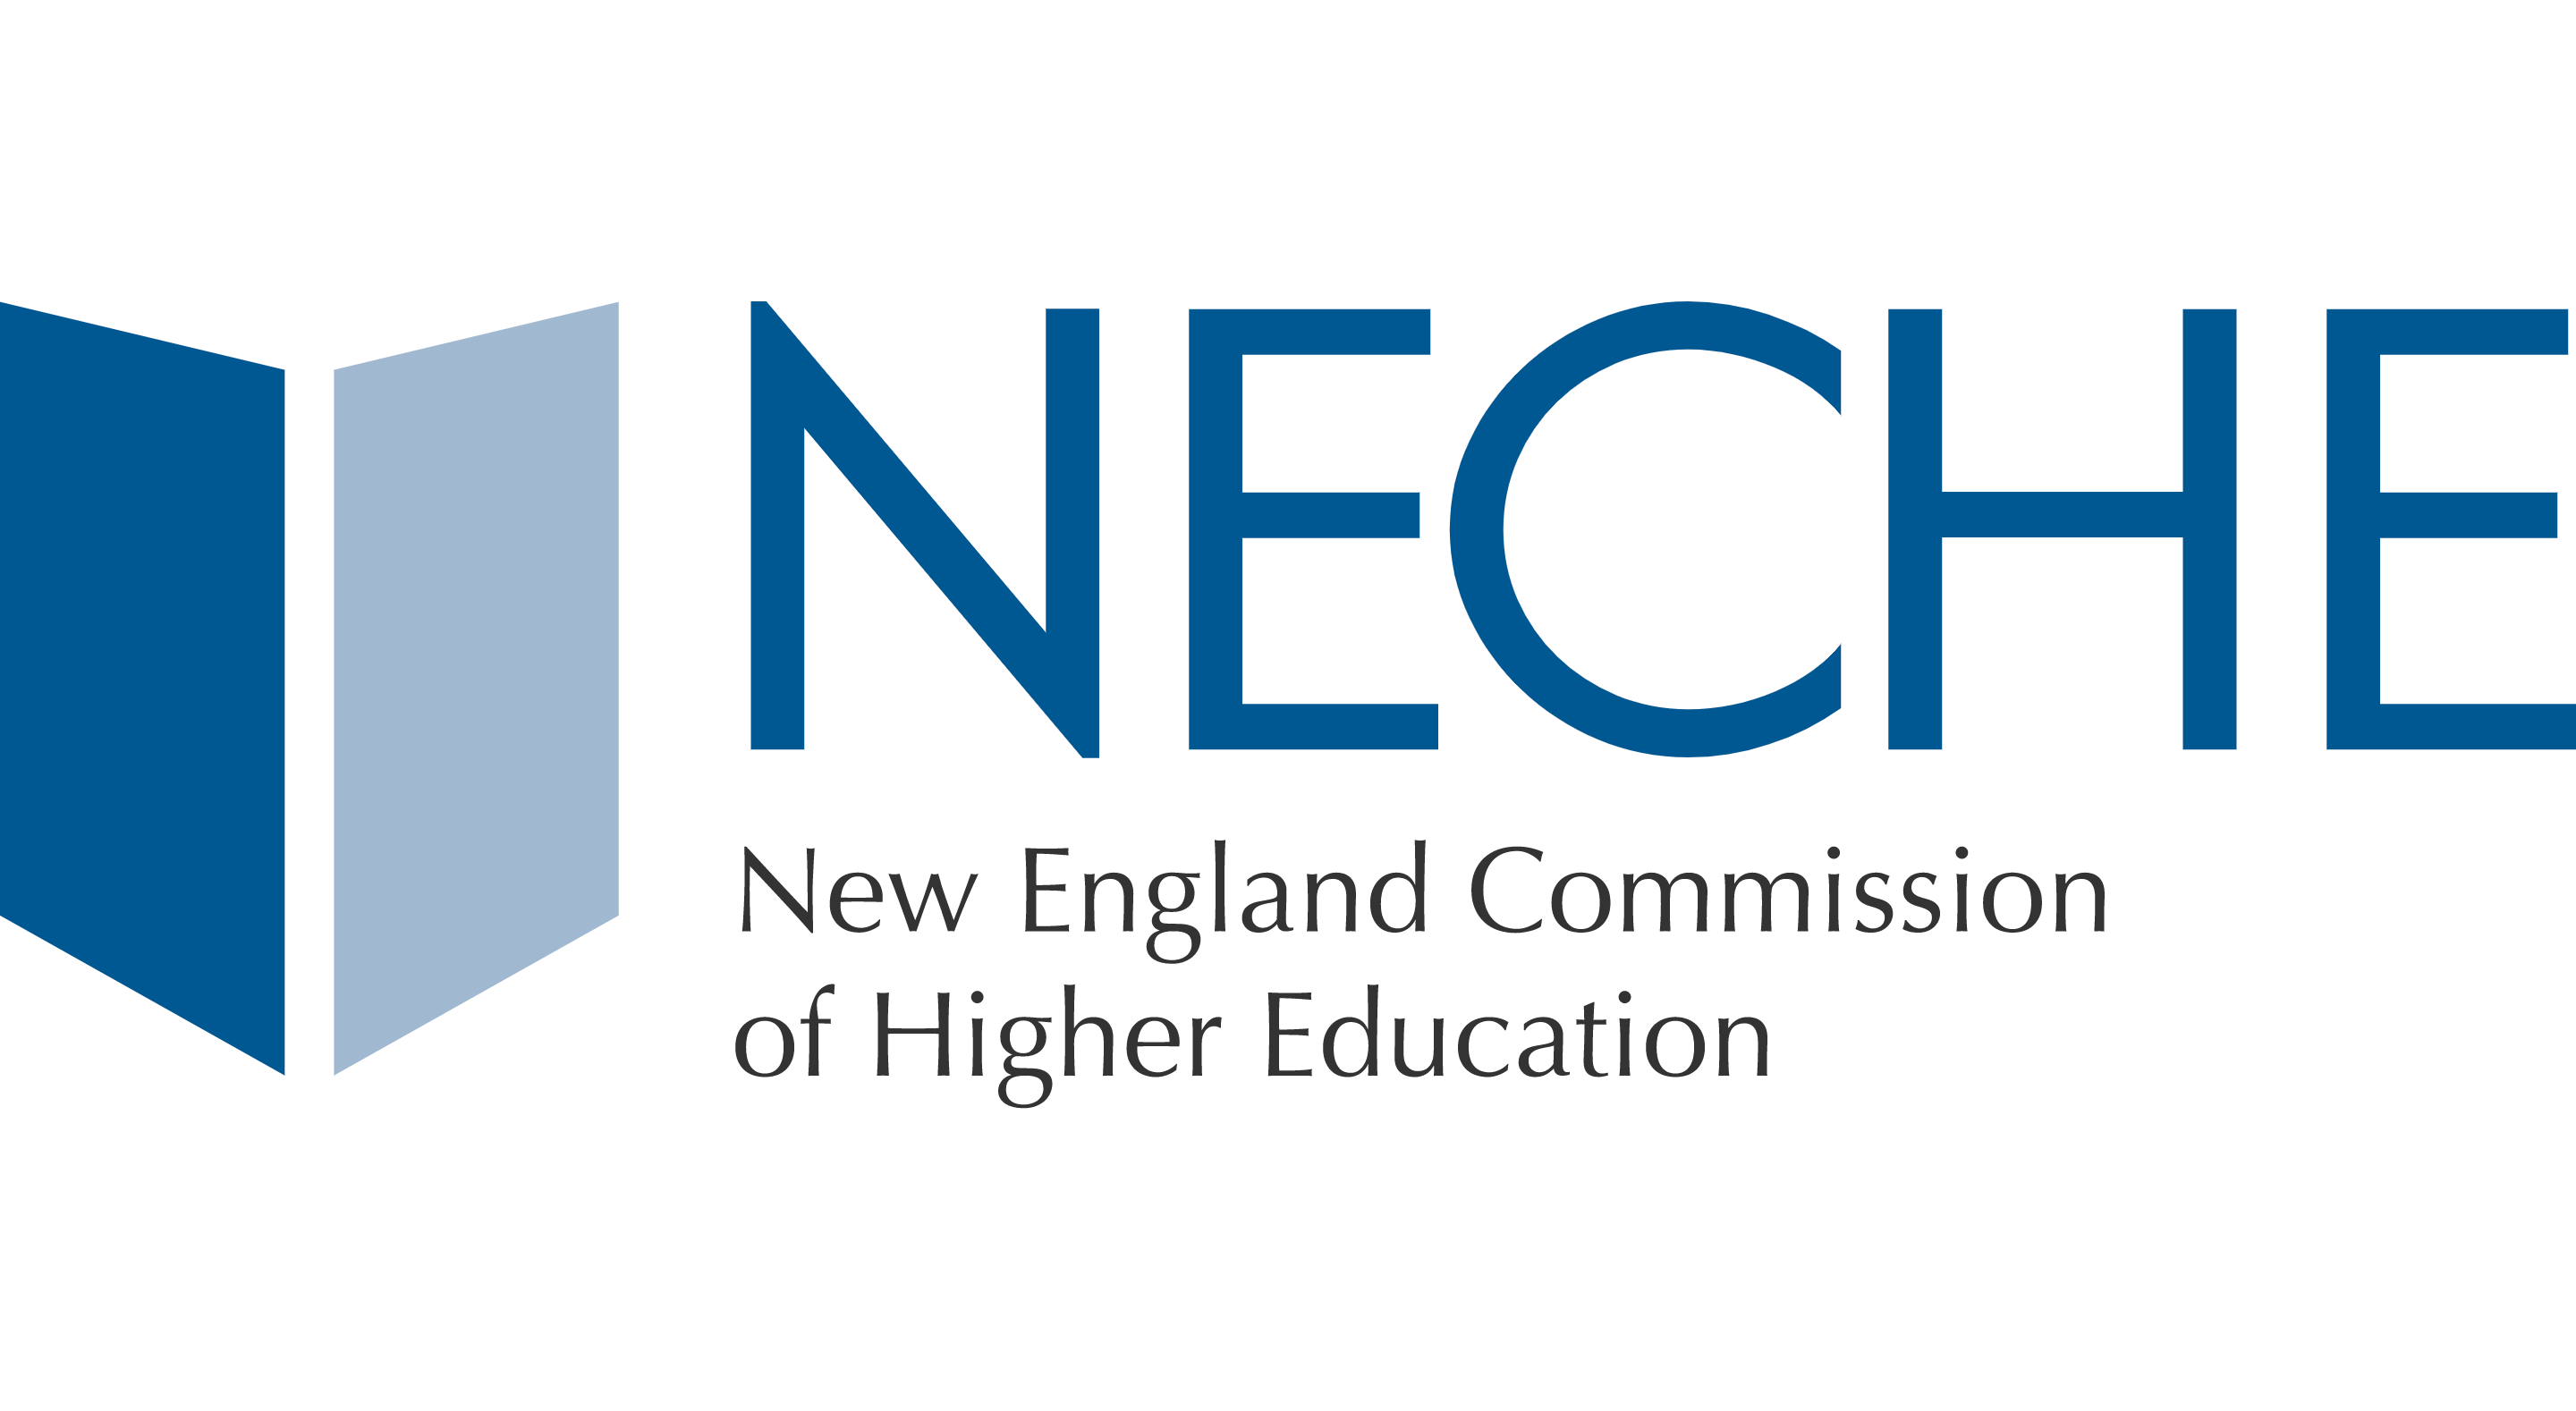 abstract blue book next to text that reads "NECHE New England Commission of Higher Education"